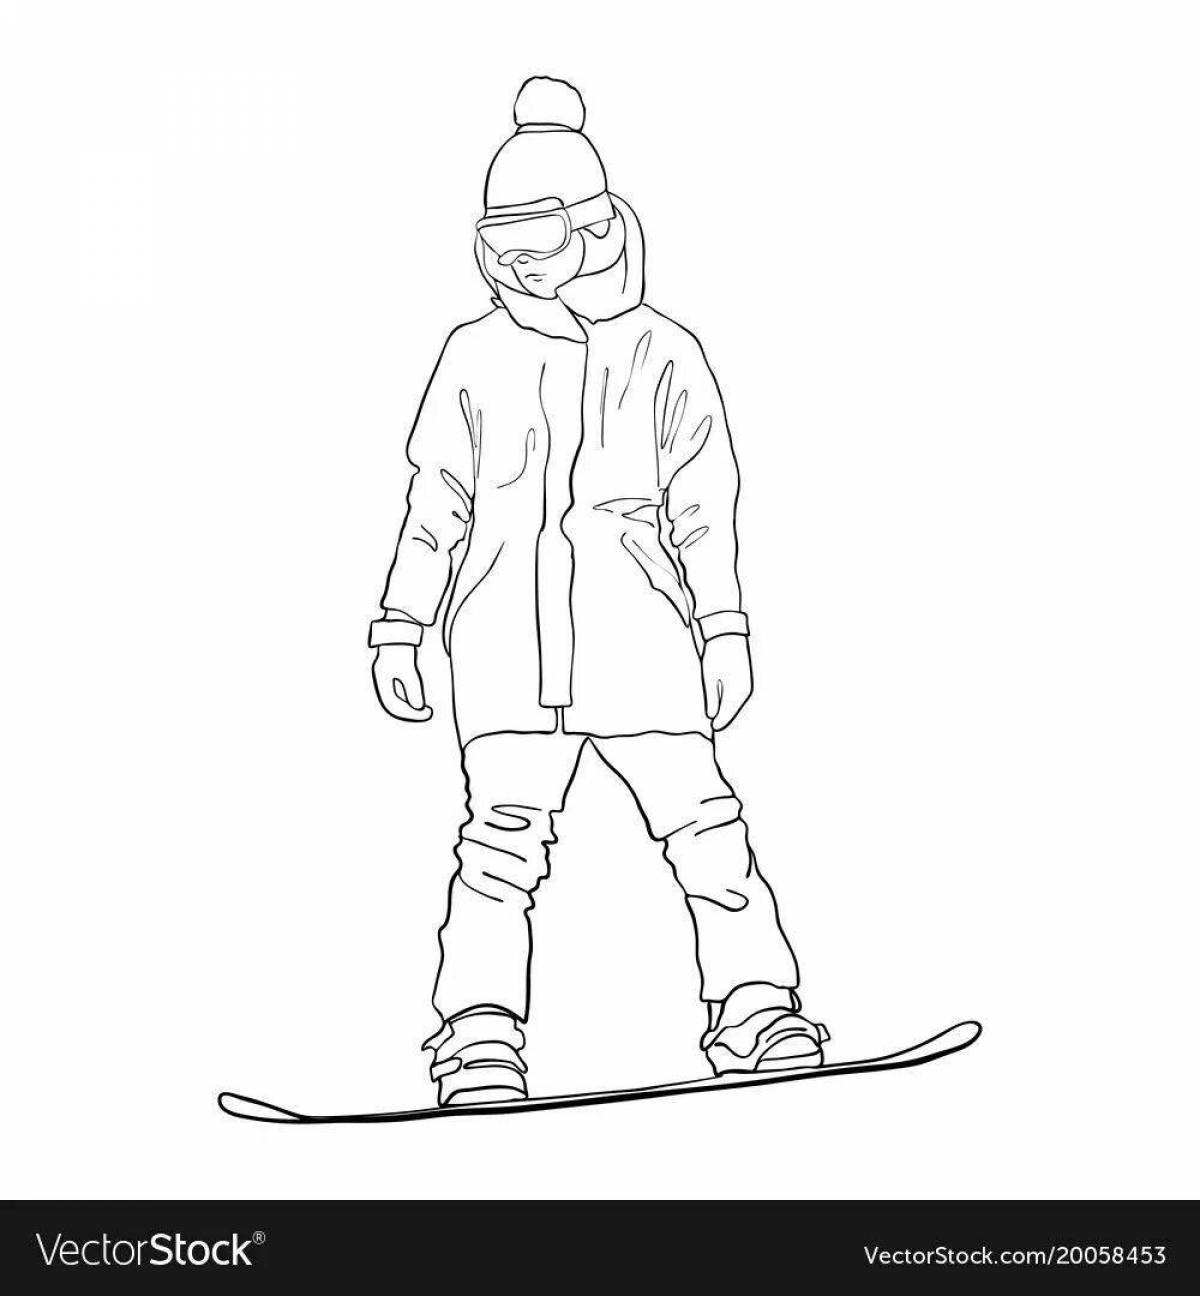 Colorful snowboard coloring page for kids